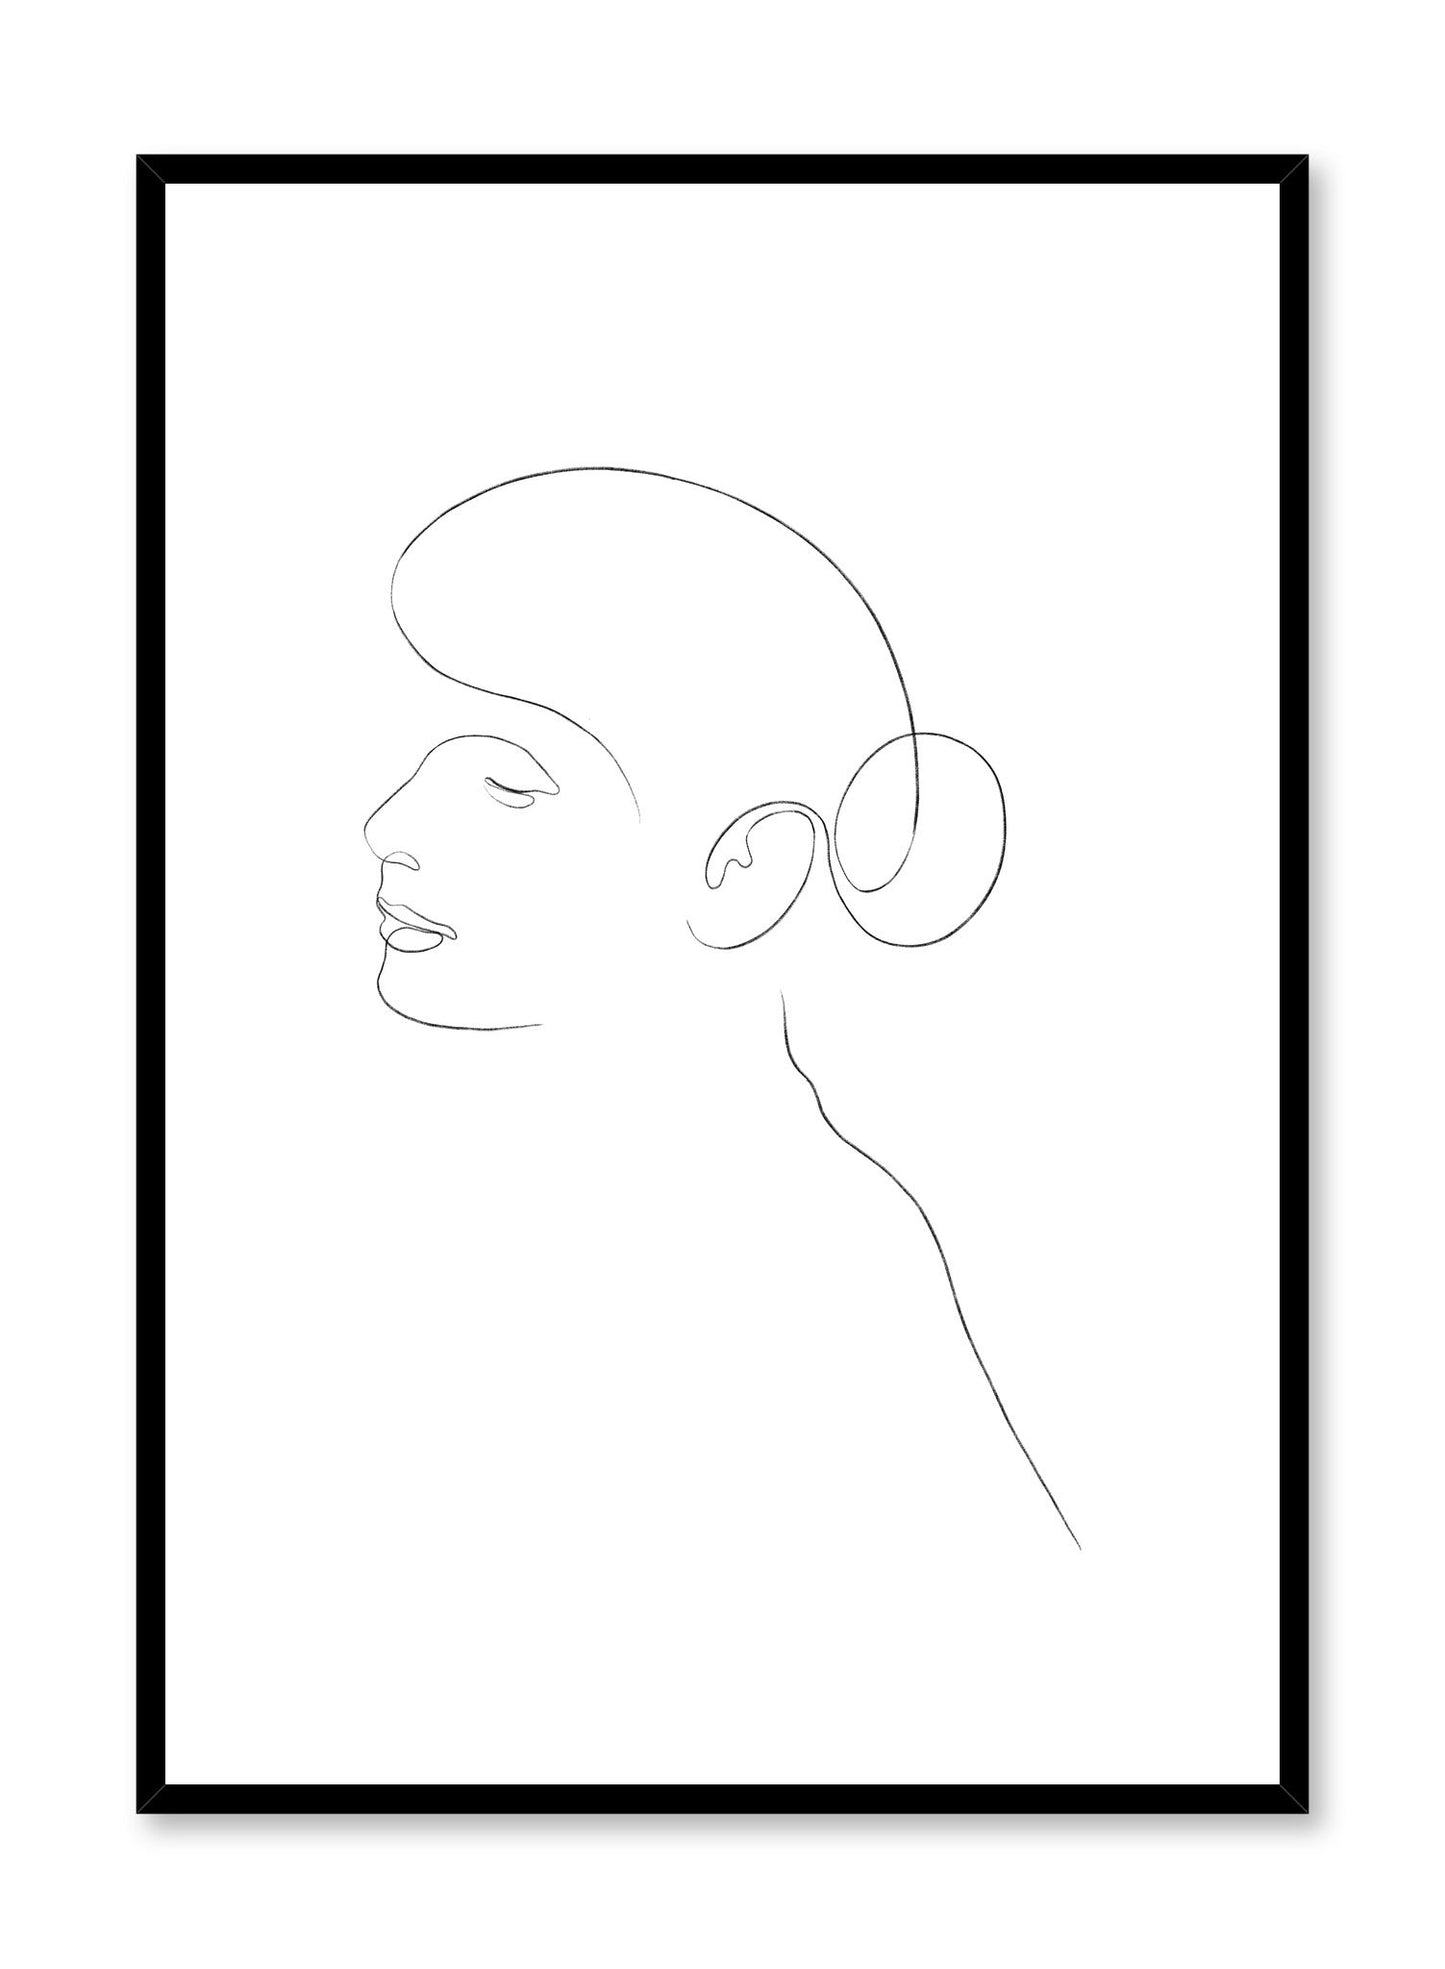 Modern minimalist poster by Opposite Wall with abstract illustration of ballerina with a bunhead chignon hairdo in black line art